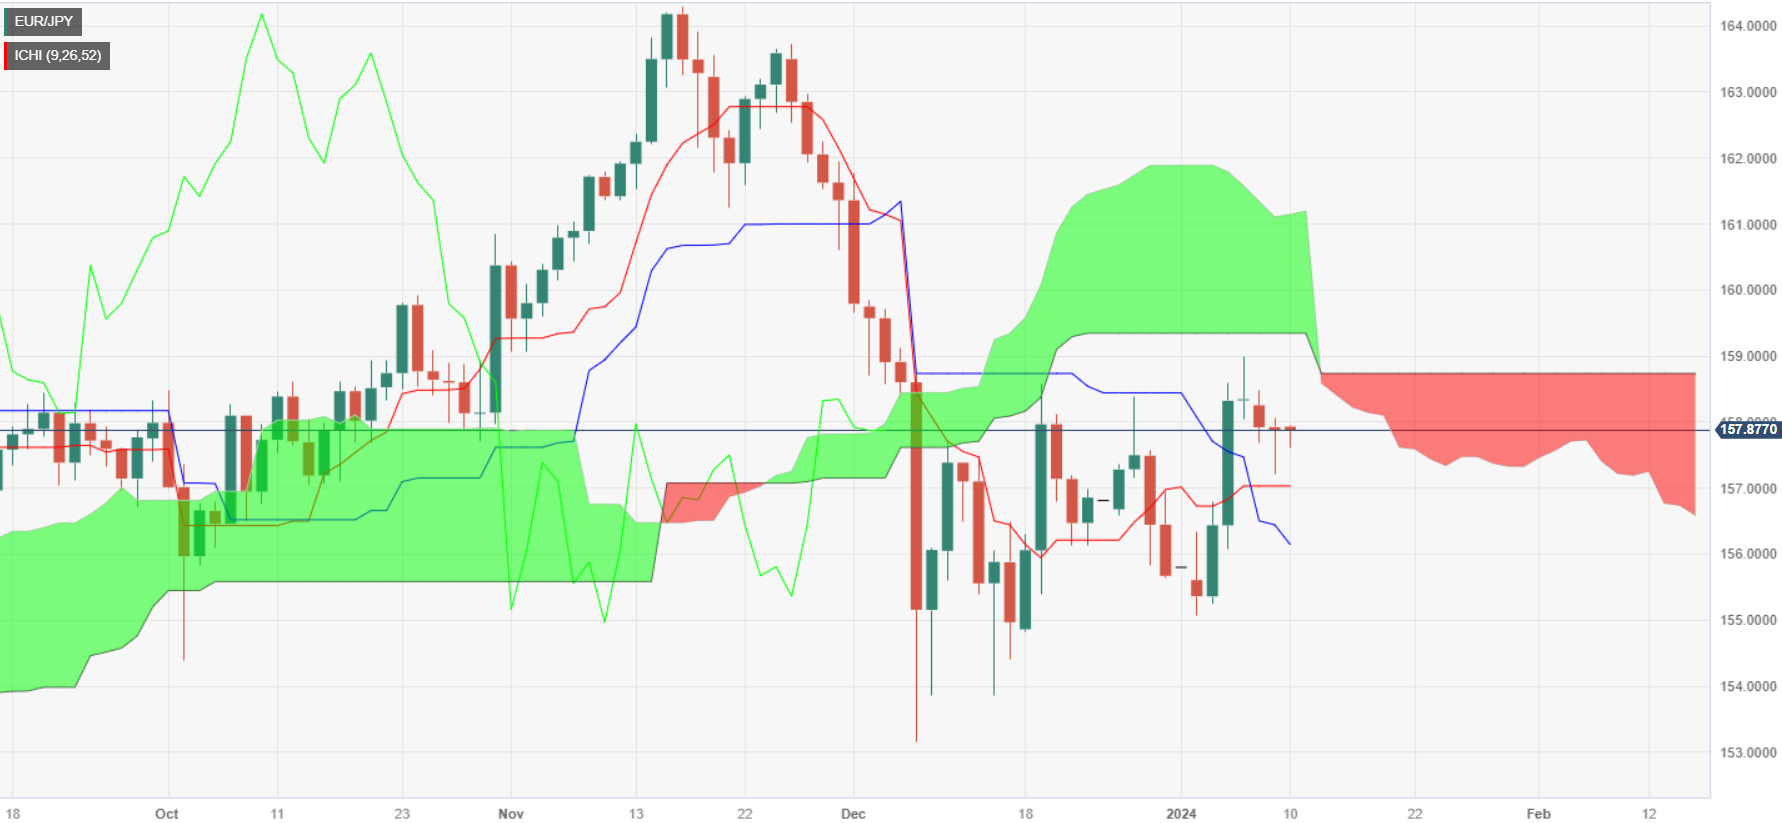 EUR/JPY Price Action – Daily Chart